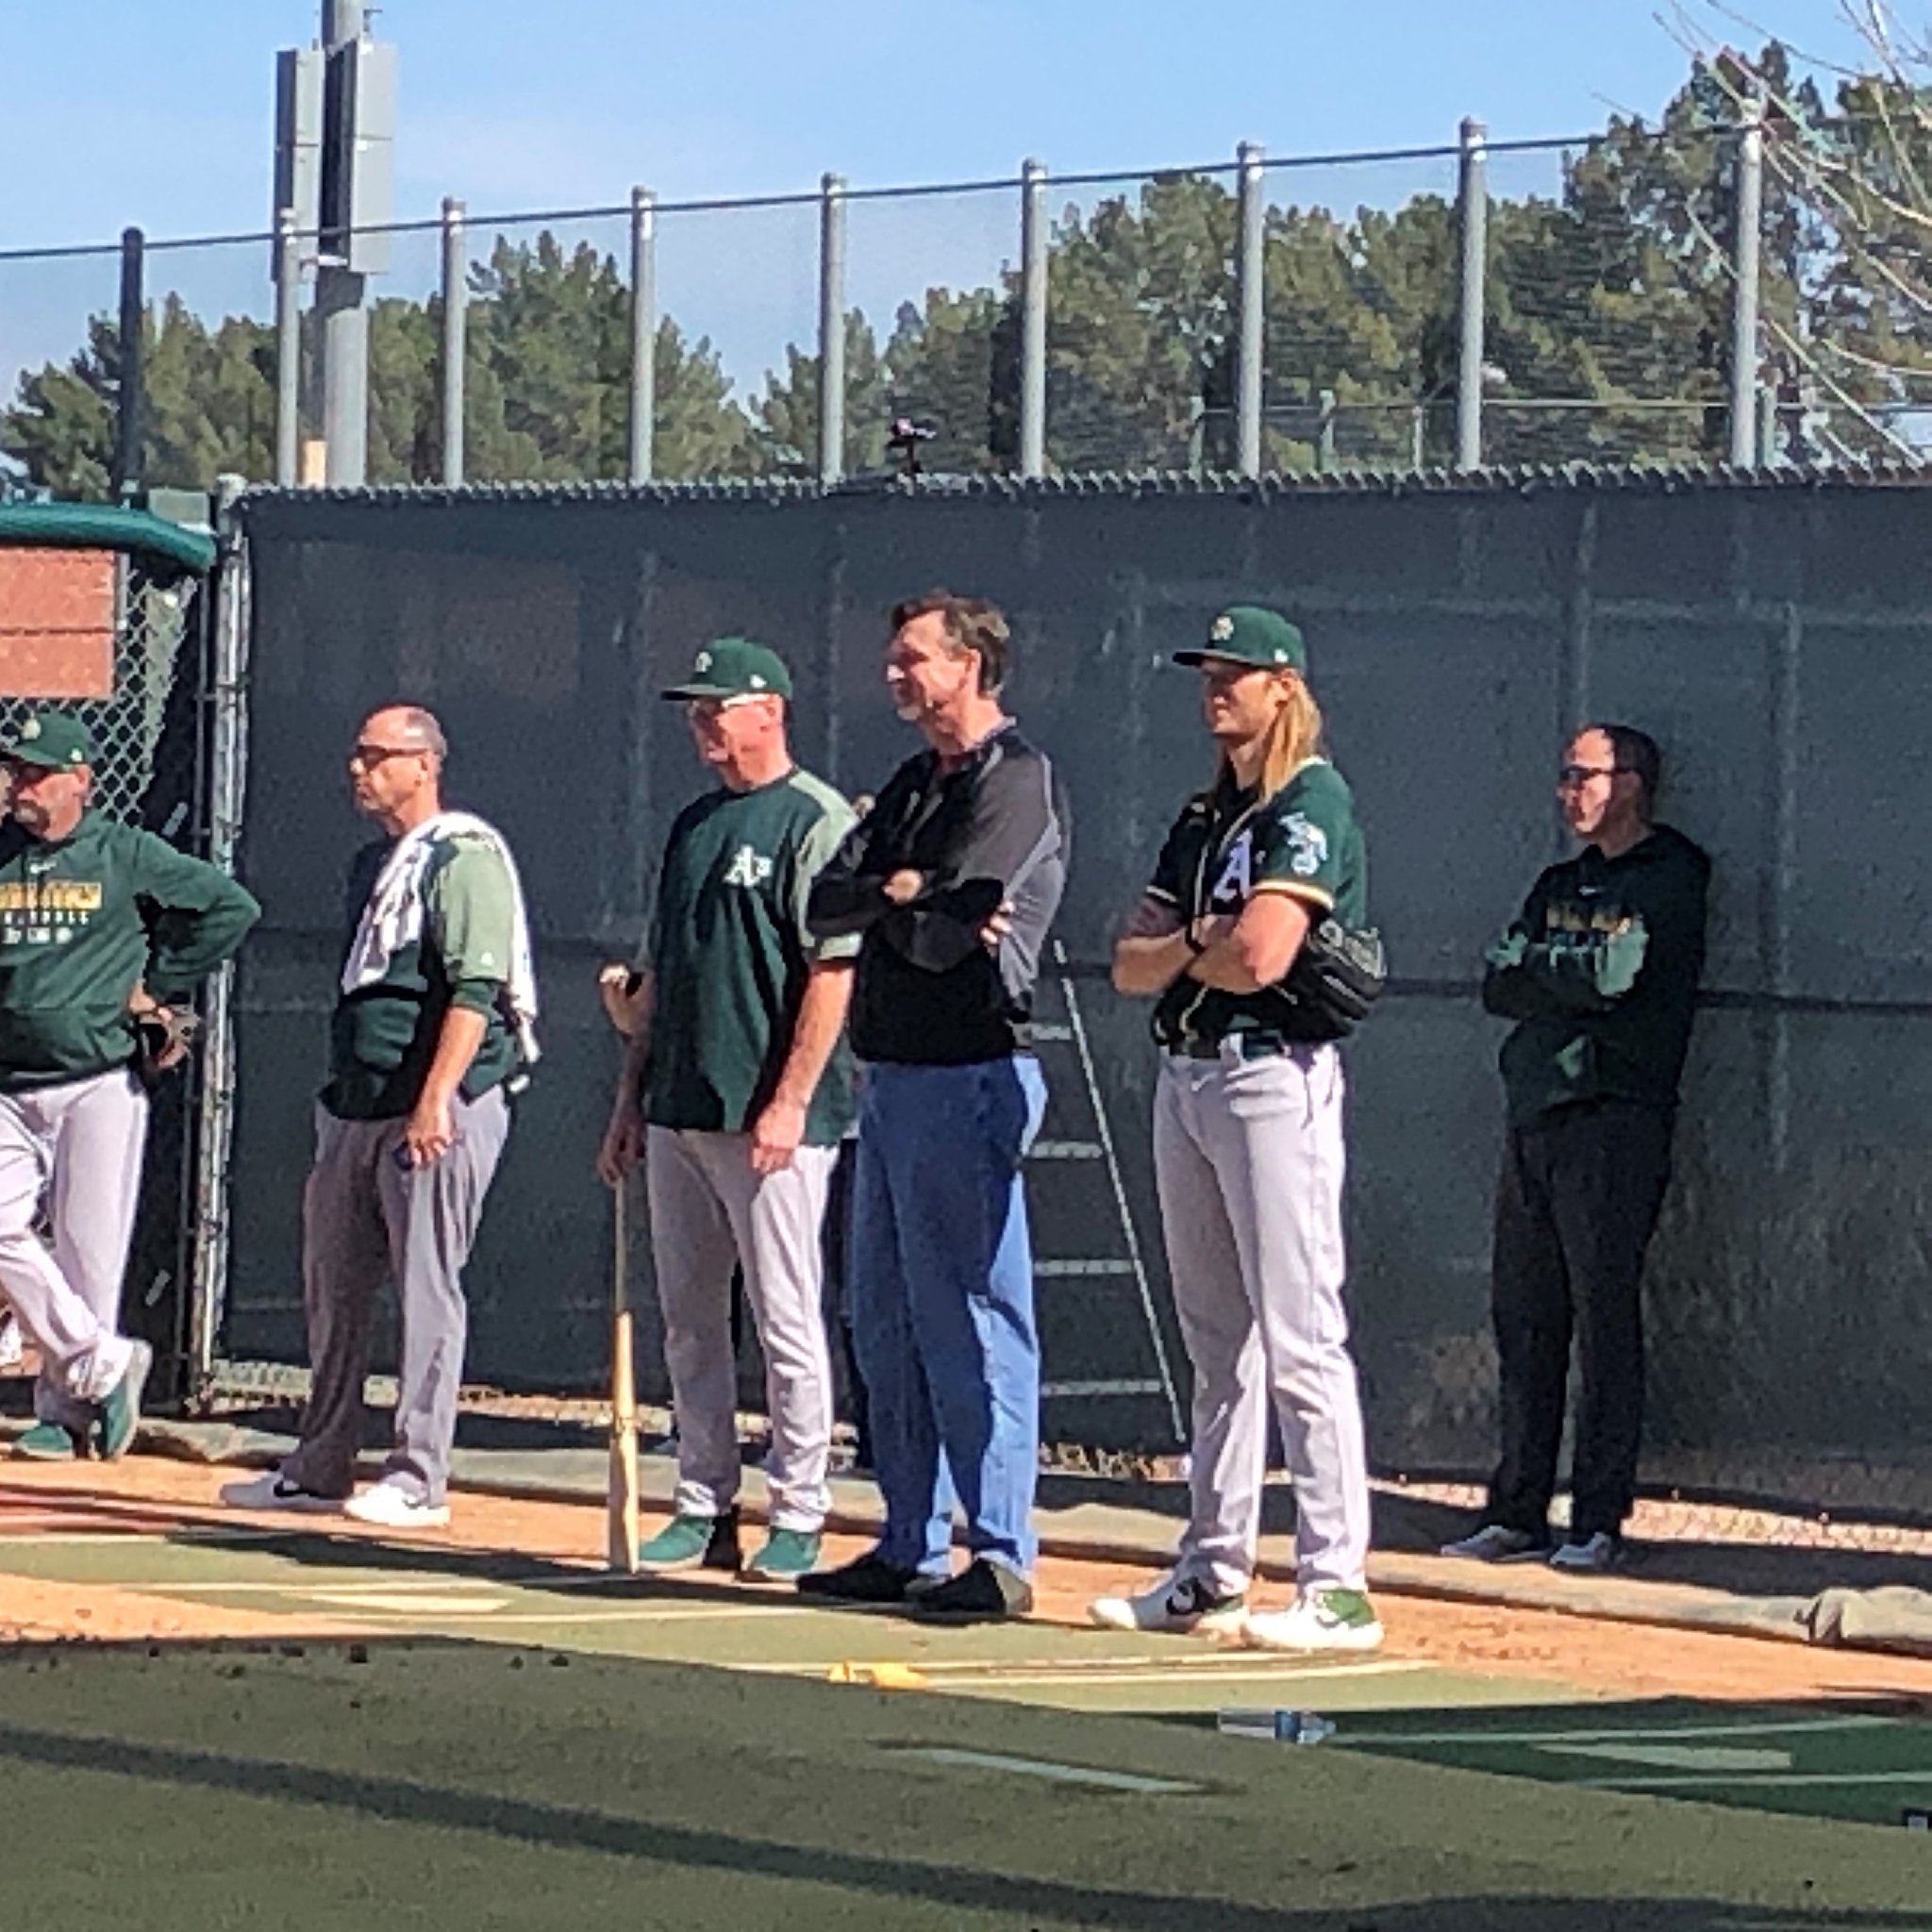 Hall of Famer Randy Johnson chats to A's Manaea, Luzardo and